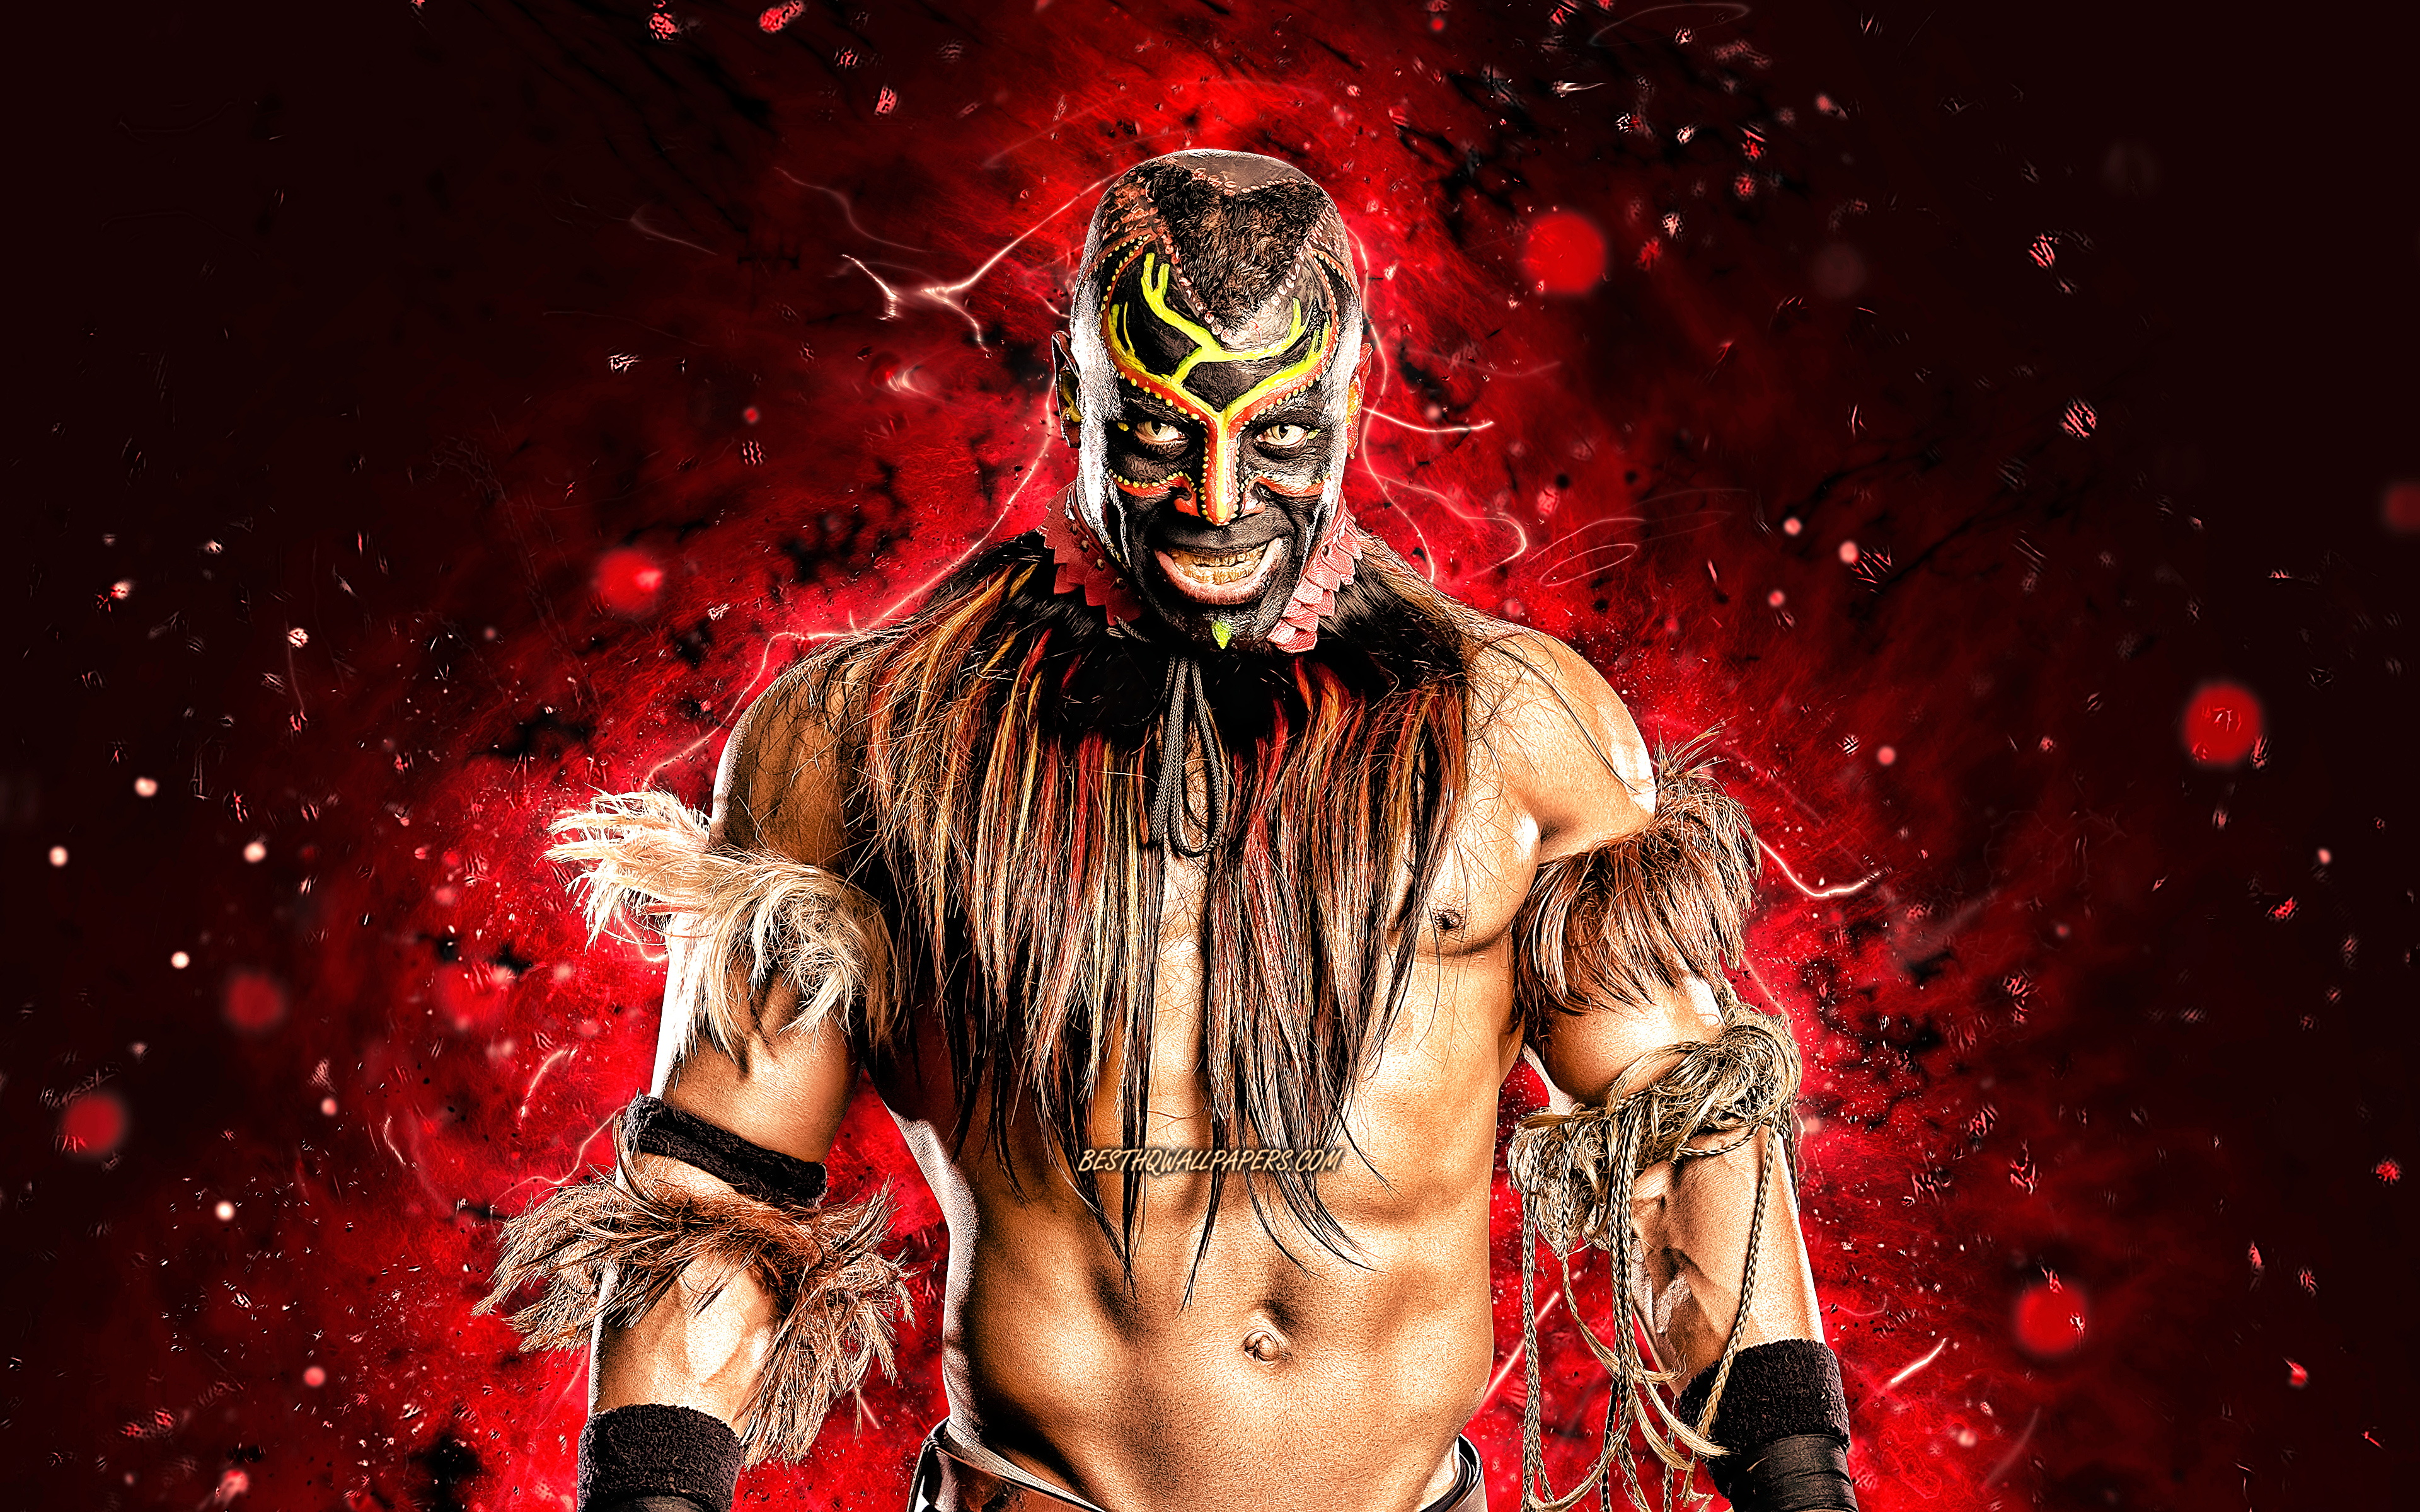 Download wallpaper 4k, The Boogeyman, american wrestler, WWE, red neon lights, Marty Wright, wrestling, creative, wrestlers, The Boogeyman 4K for desktop with resolution 3840x2400. High Quality HD picture wallpaper